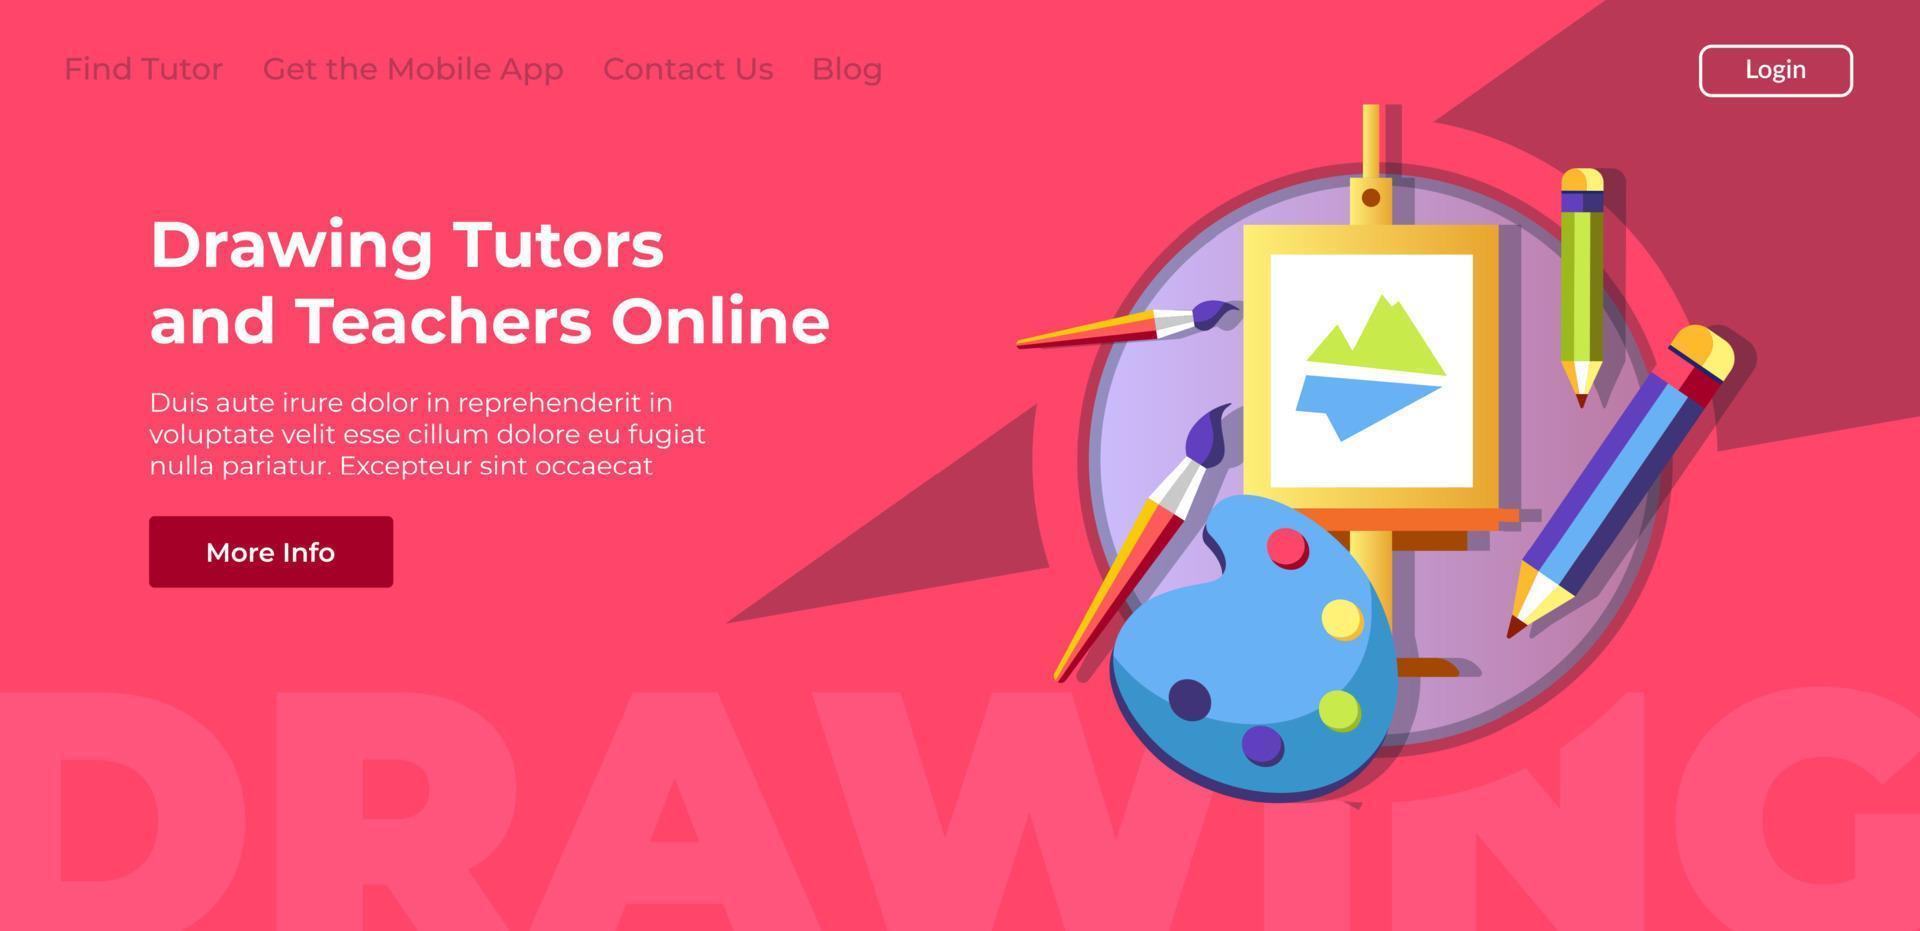 Drawing tutors and teachers online, website page vector